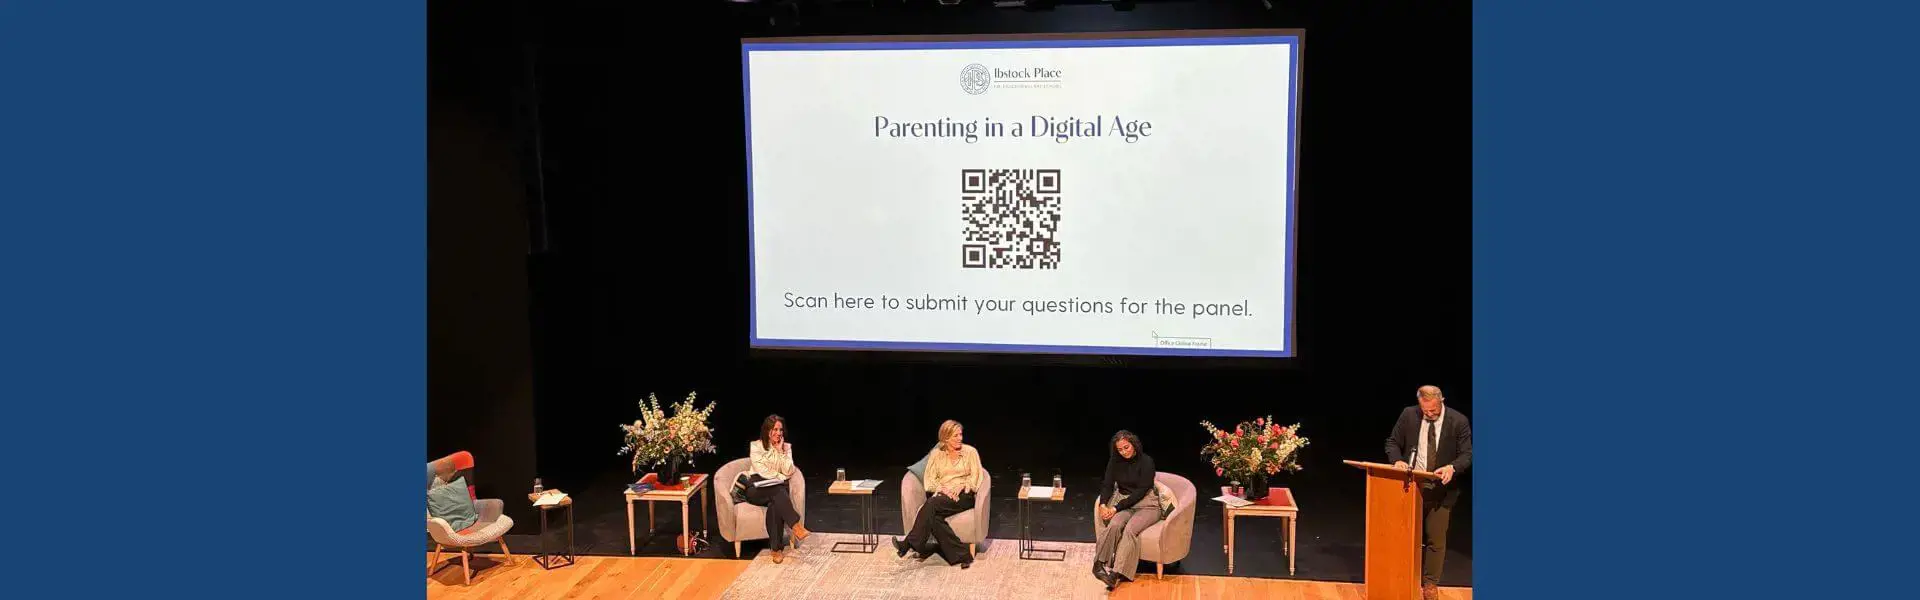 Parenting in a Digital Age event at Ibstock Place School, Roehampton